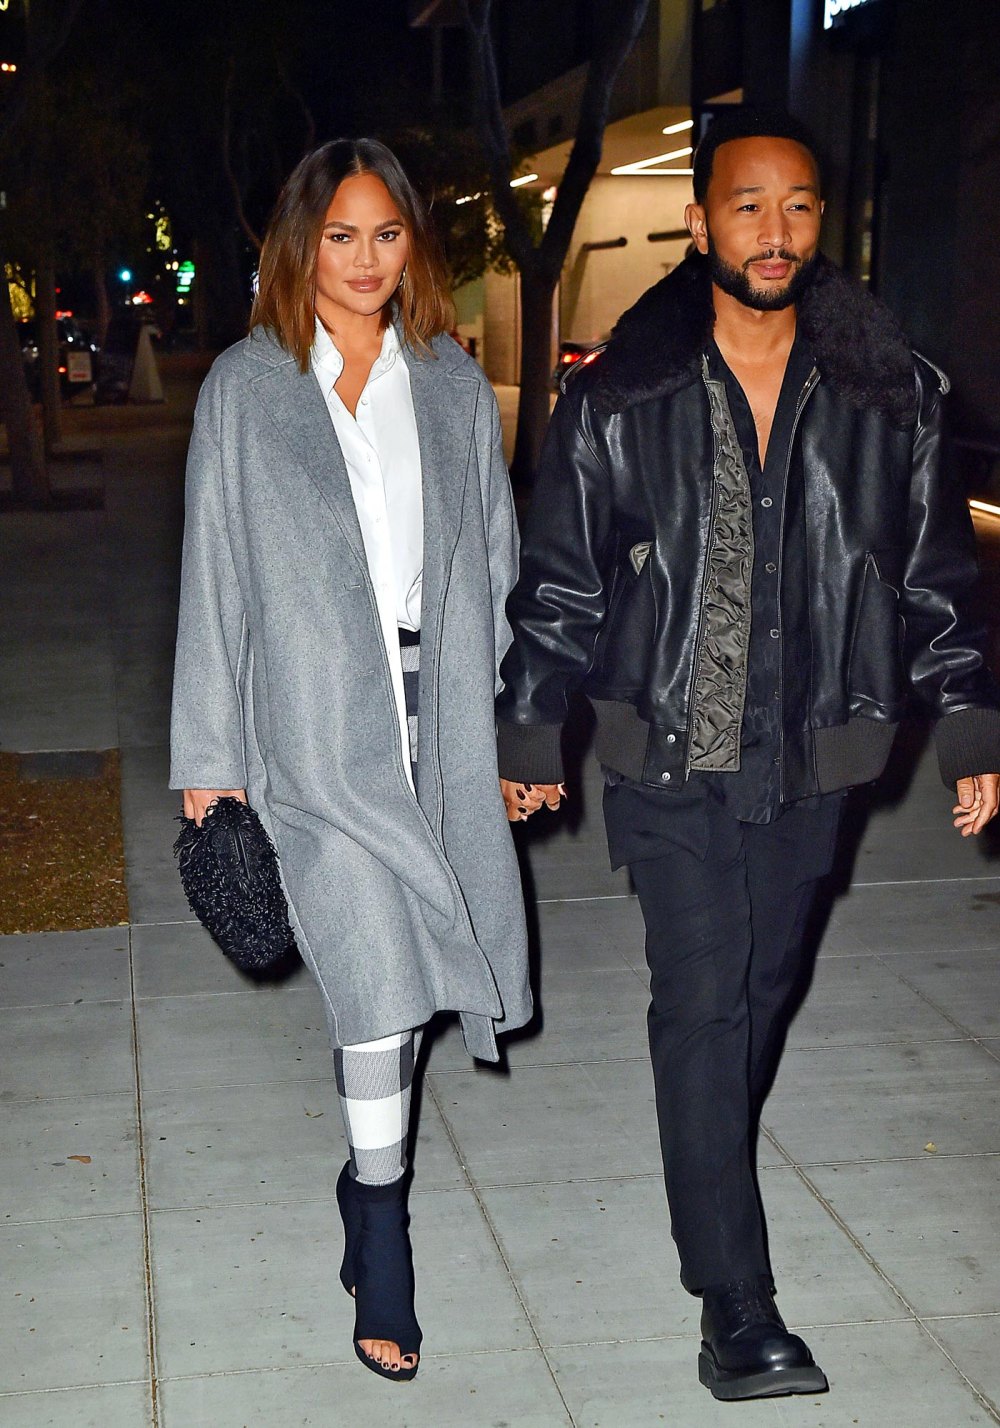 Chrissy Teigen pairs Pajama Pants With Heels for Date Night With John Legend 875